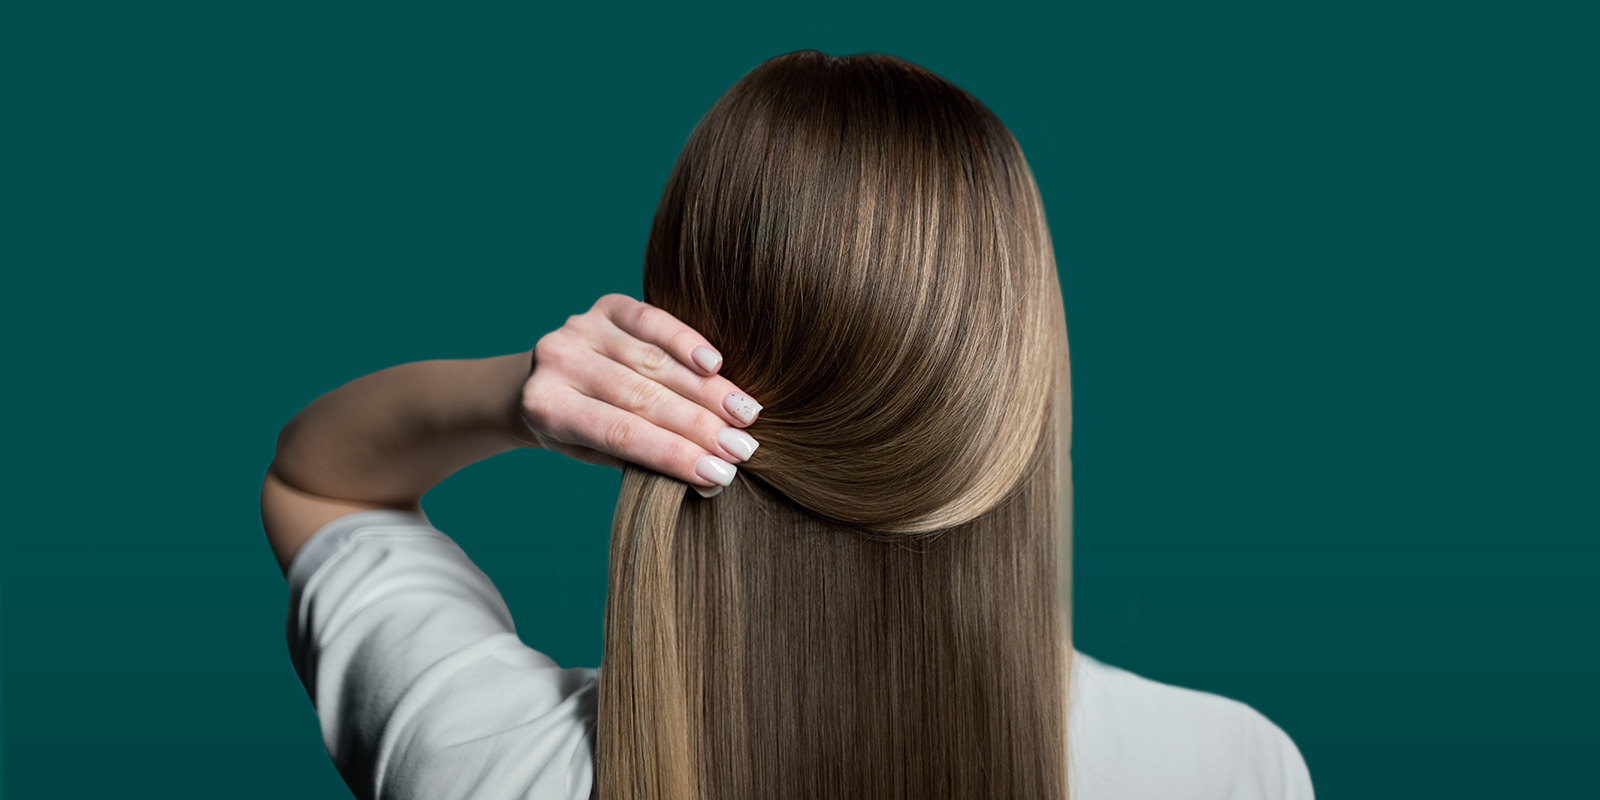 How to clean the scalp: Here are the most important methods